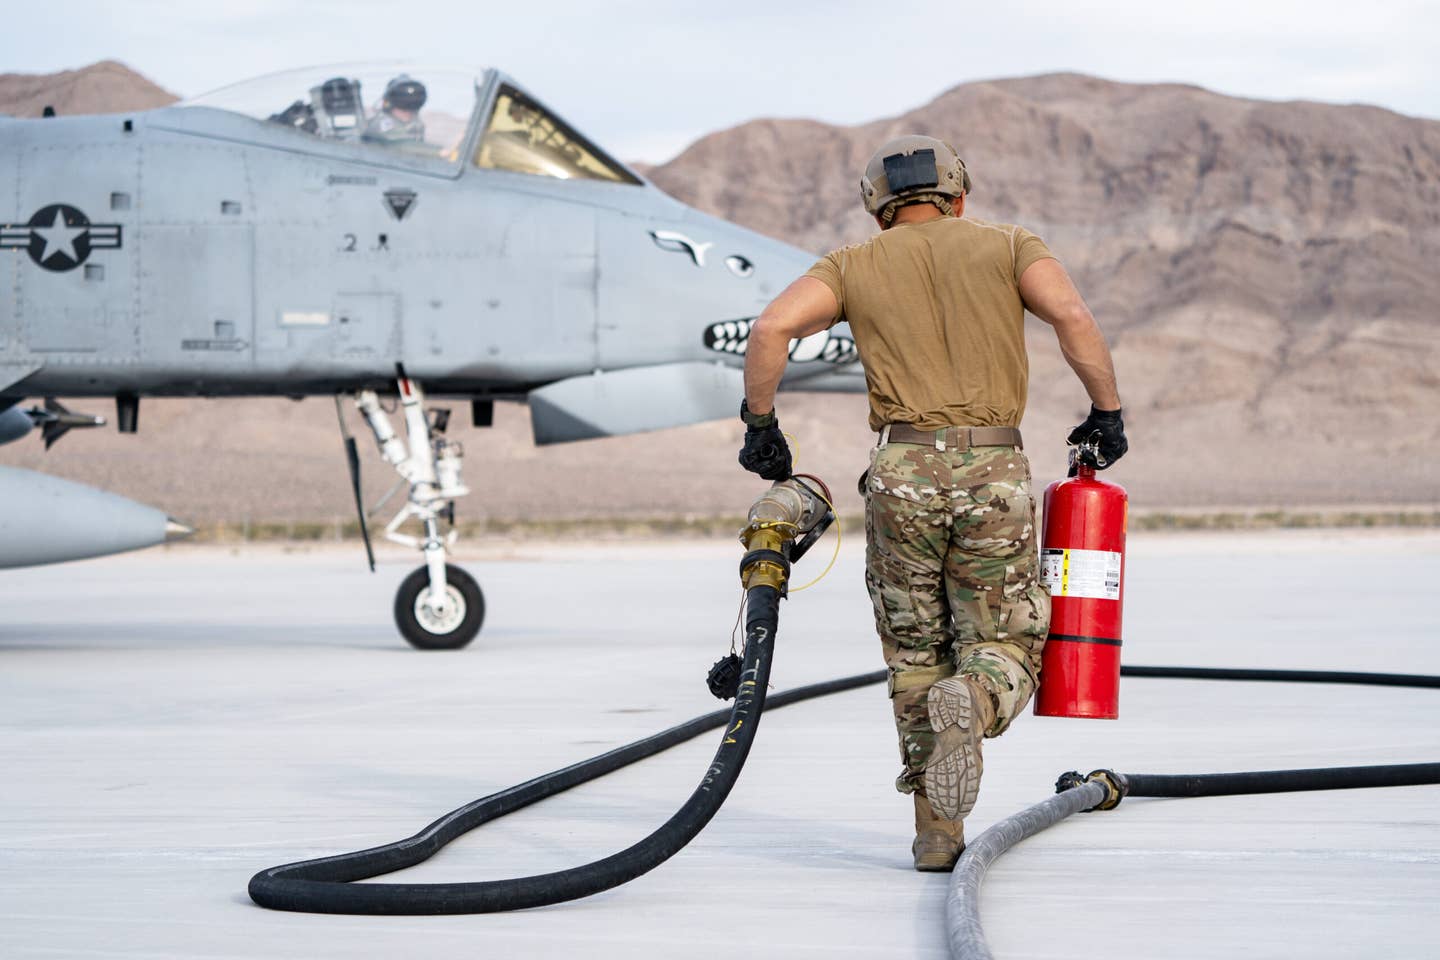 A Forward Area Refueling Point (FARP) operator runs to refuel an A-10C Thunderbolt II during Black Flag 22-1 at Nellis Air Force Base, Nevada, May 12, 2022. <em>U.S. Air Force photo by Airman 1st Class Josey Blades</em>